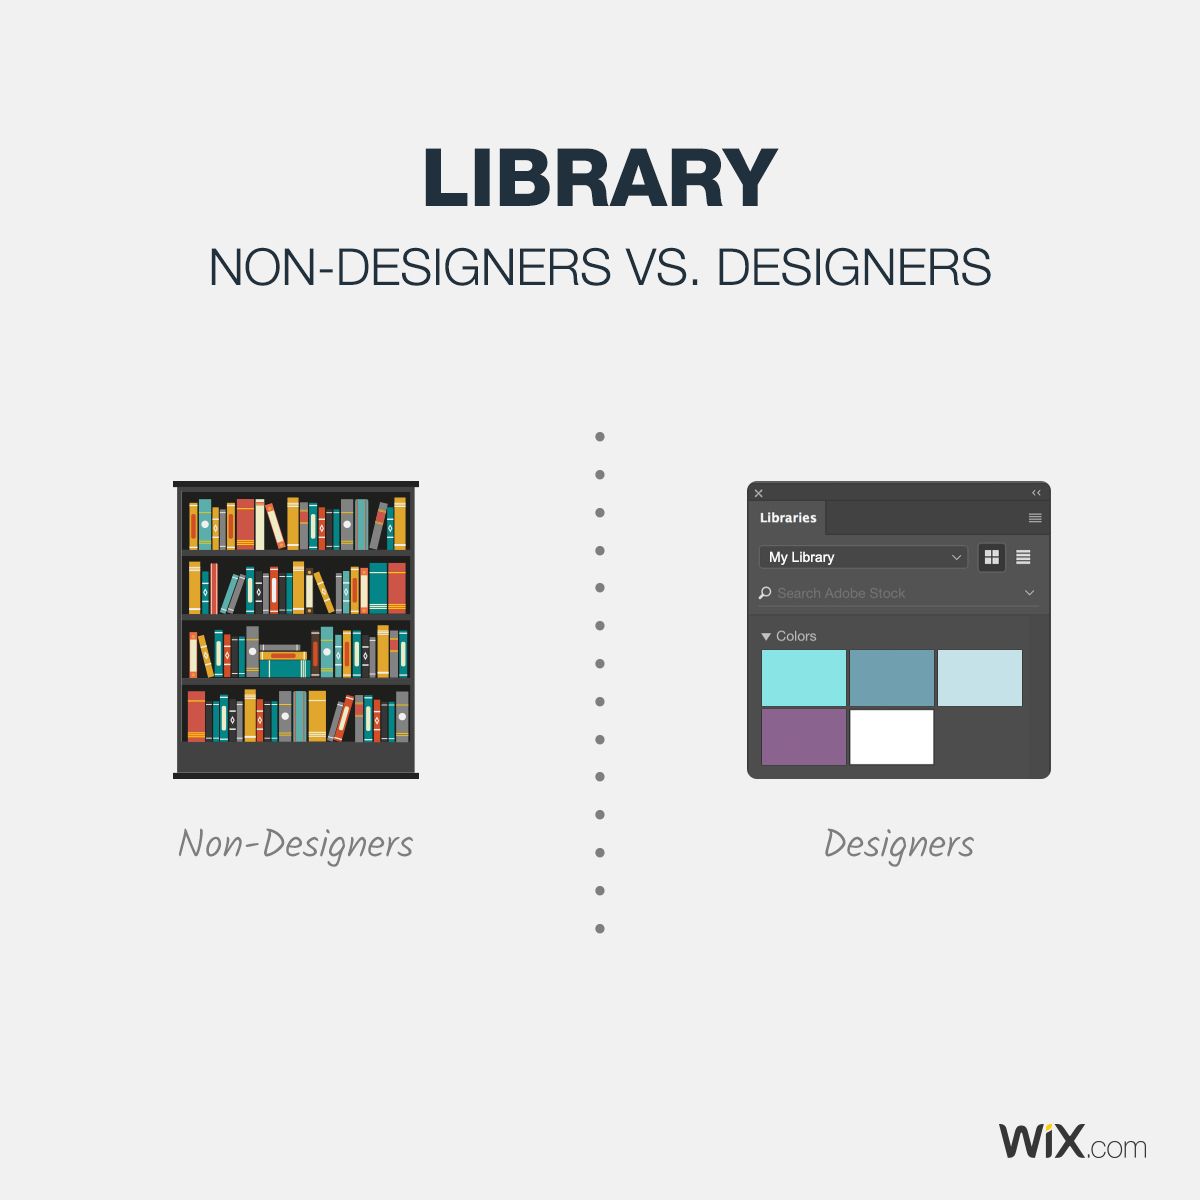 Differences Between Designers and Non-Designers - Library